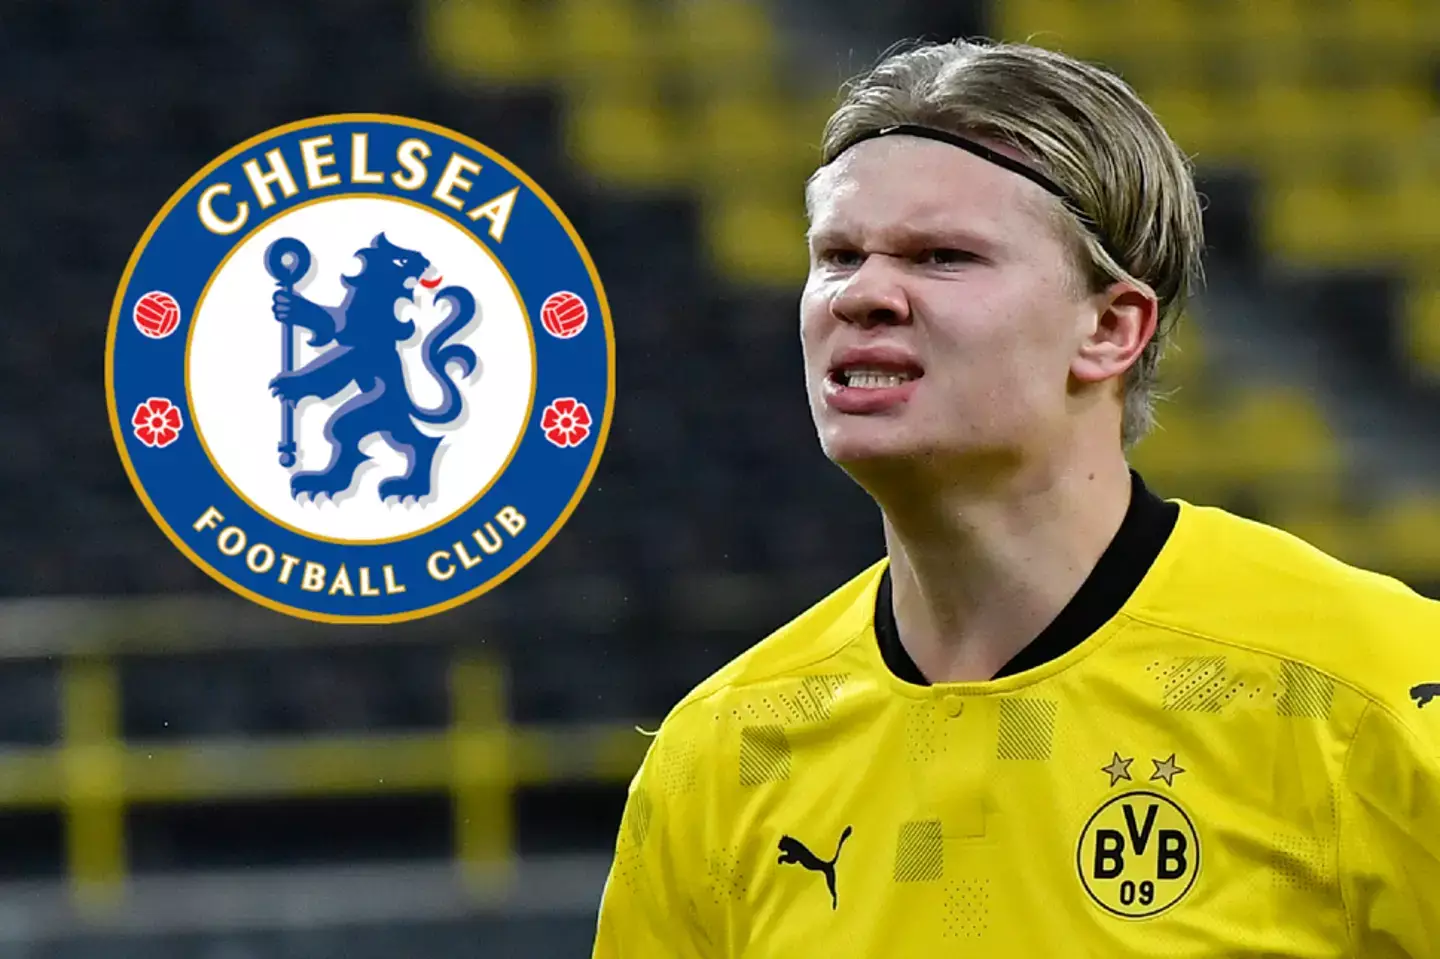 Chelsea Target Erling Haaland Has Cheeky Response To Being Asked About His Future